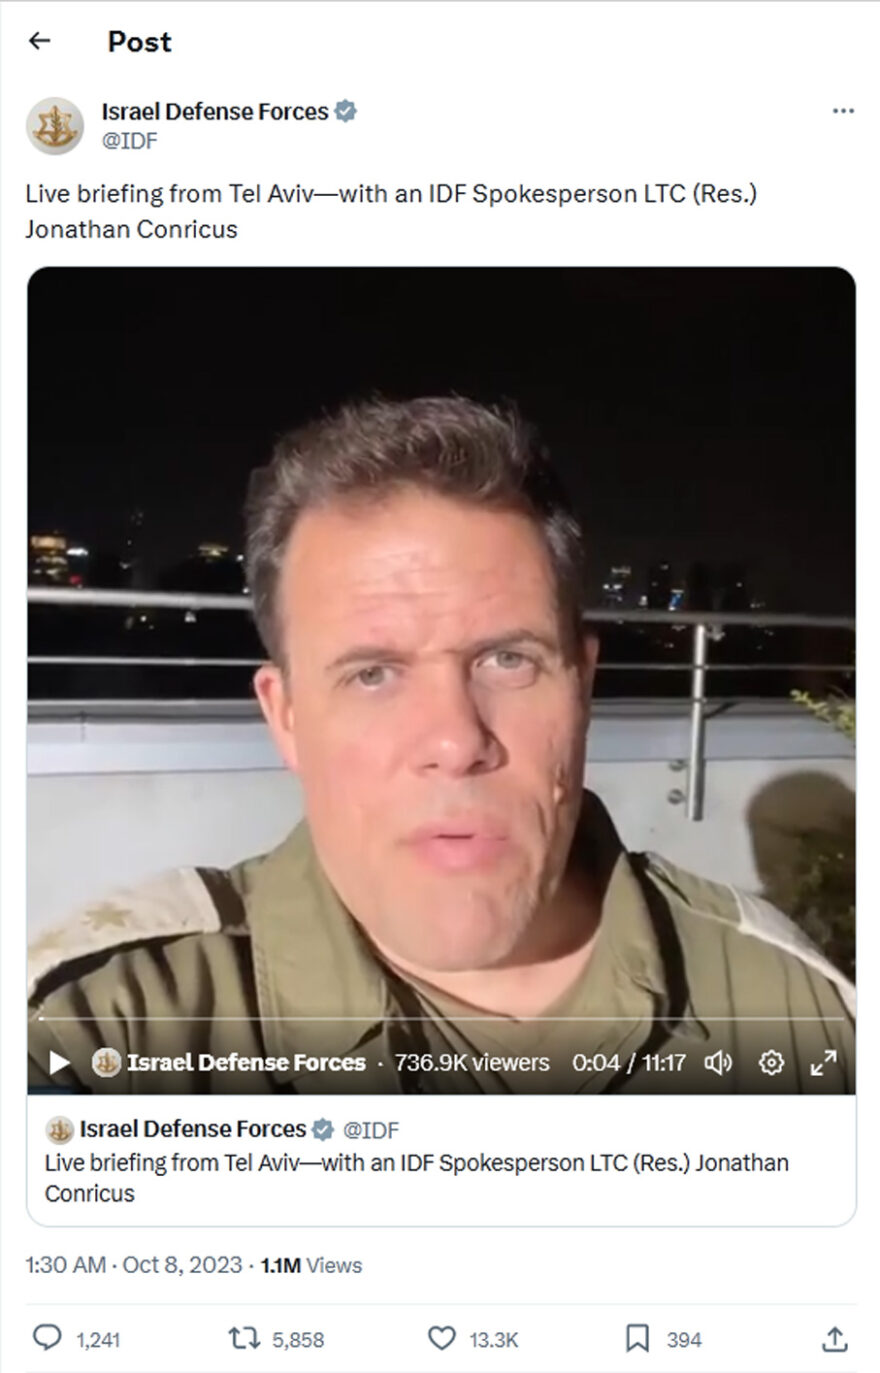 Israel Defense Forces - Live briefing from Tel Aviv